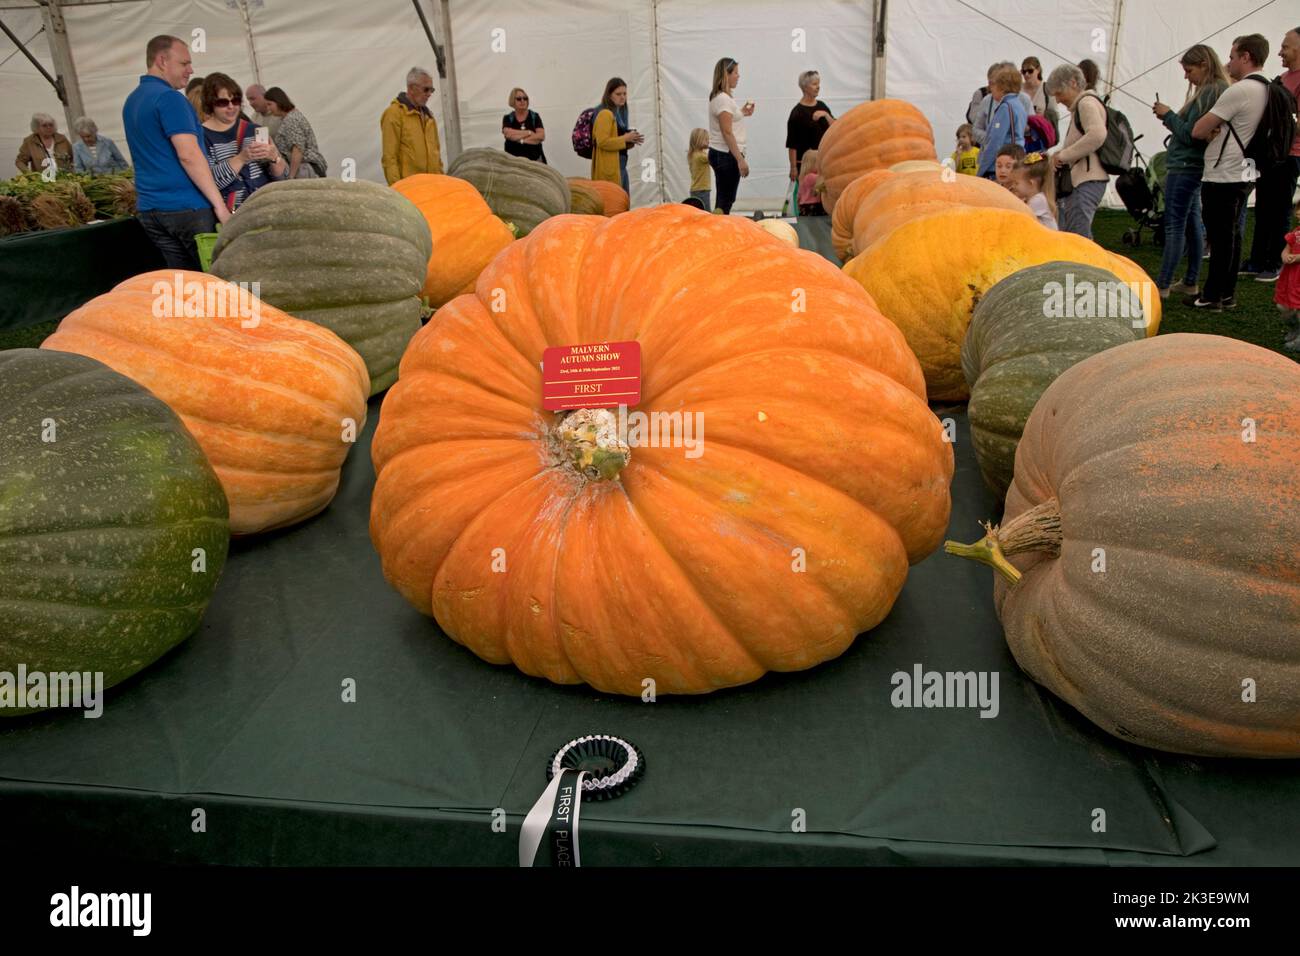 Giant pumpkins are some of the giant vegetables at Three Counties Autumn Show  Great Malvern, UK Stock Photo